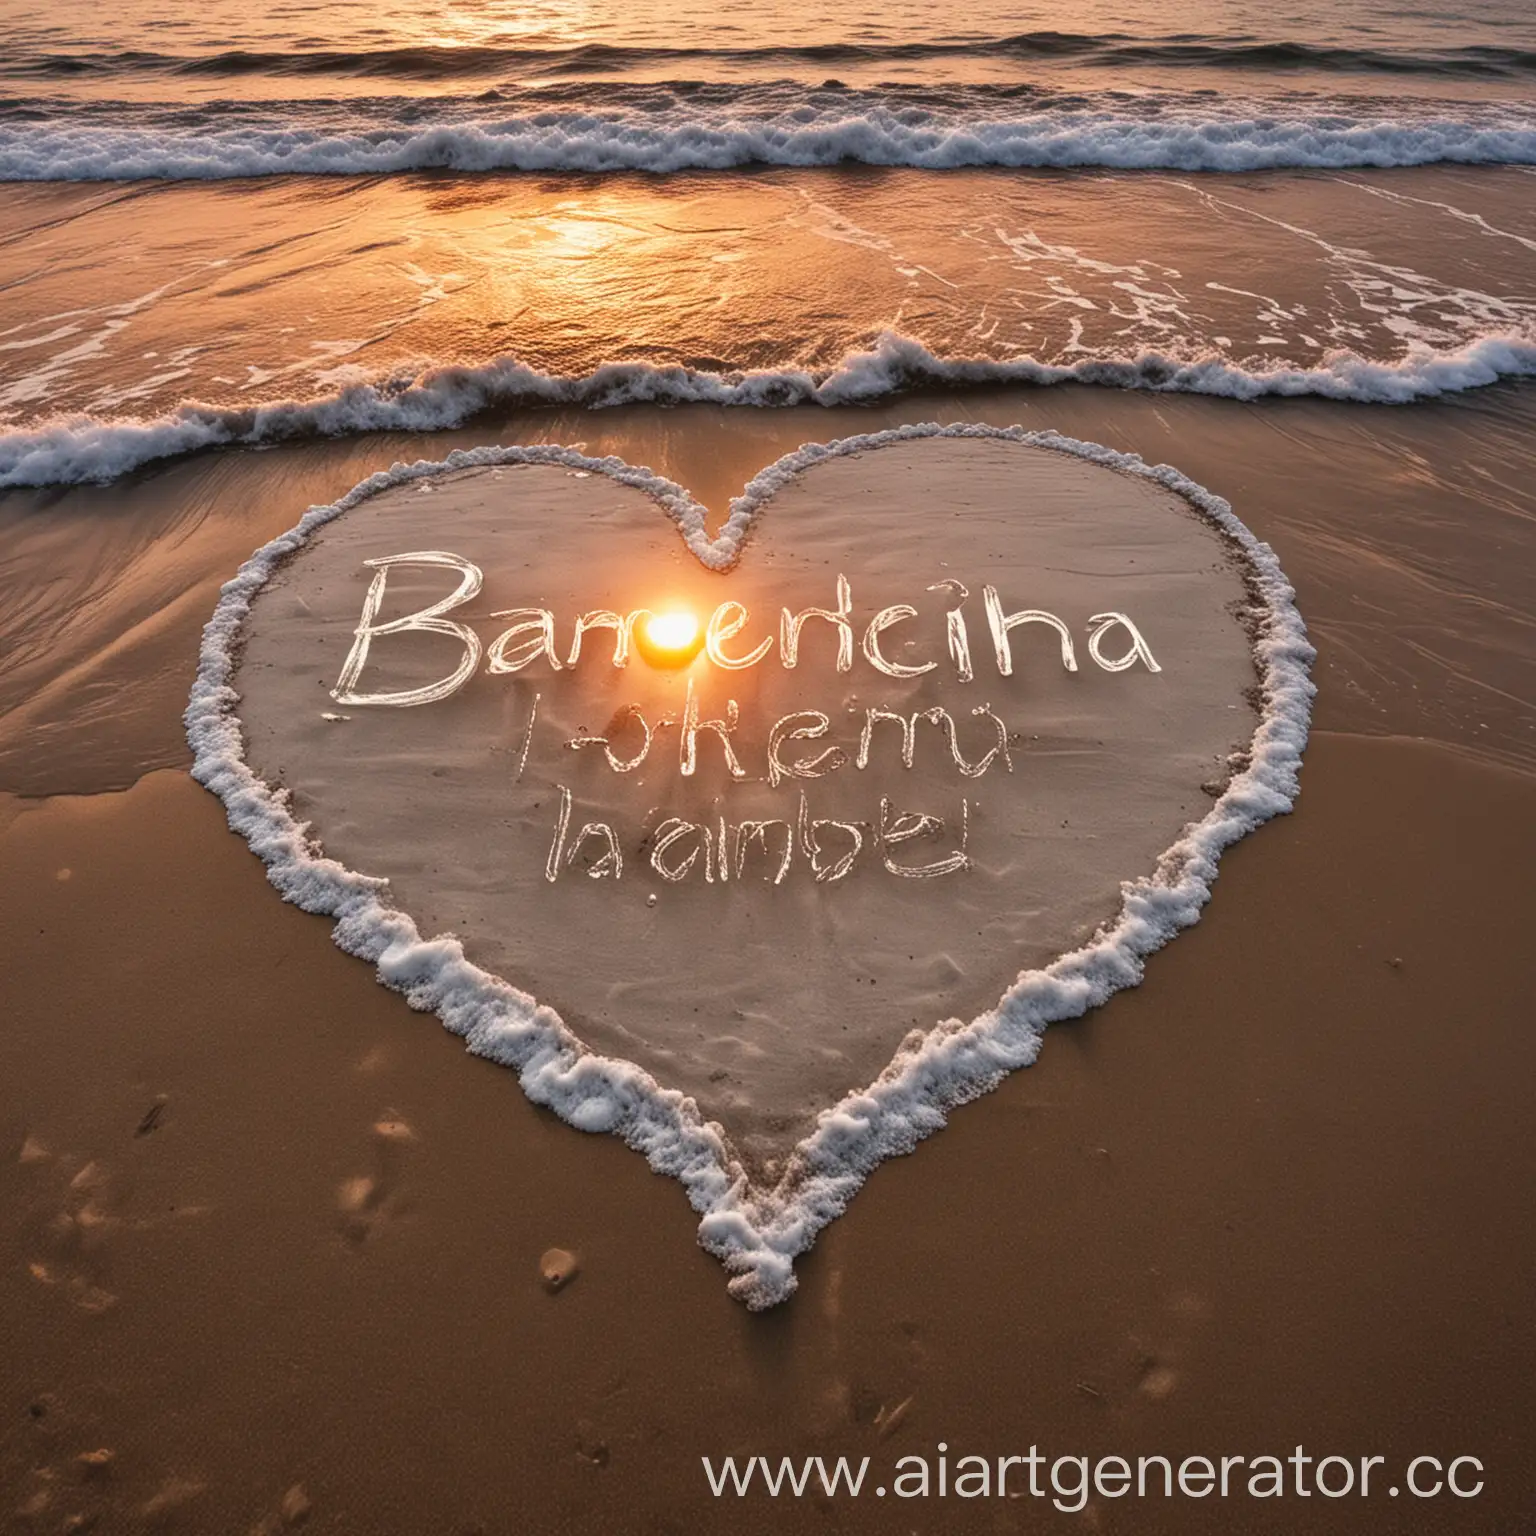 Sunset at the beach, 'Варюшенька' inscription in the center with text color white and glow, from 2 to 3 o'clock, on a heart shape with transparency 40%